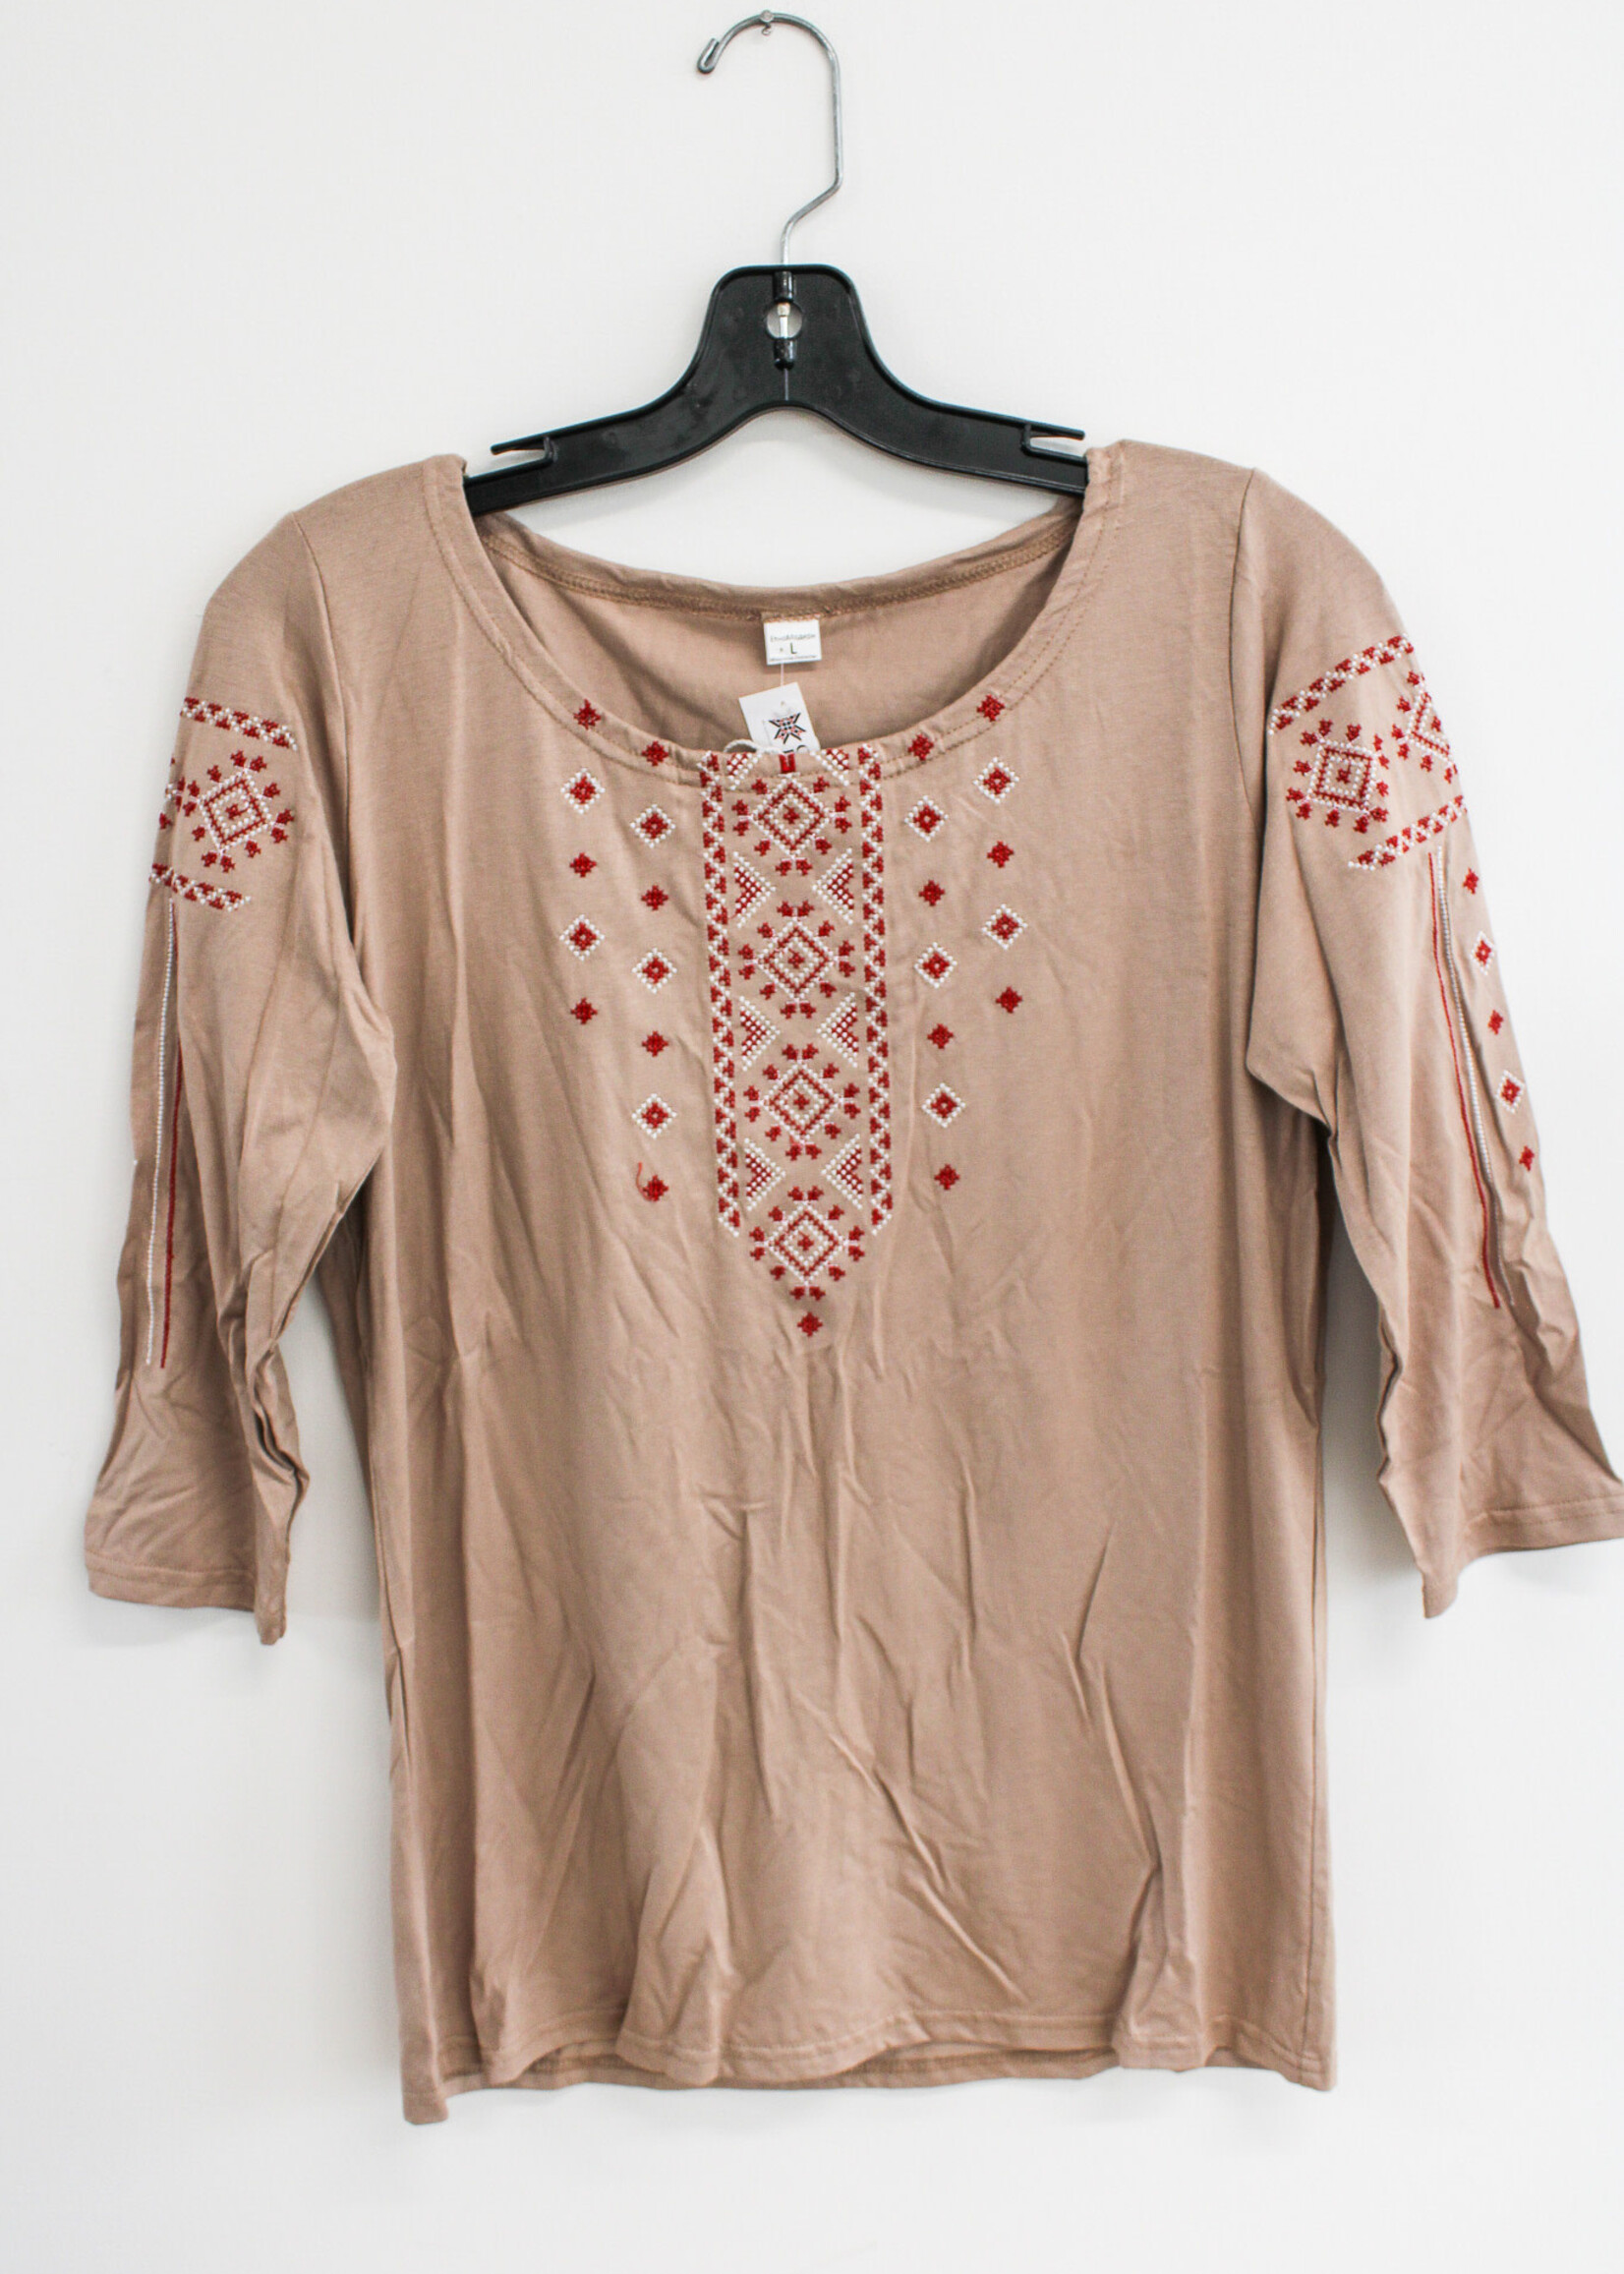 APPAREL - Beige T-Shirt, (W), size L, 3/4 length sleeve with white tassels